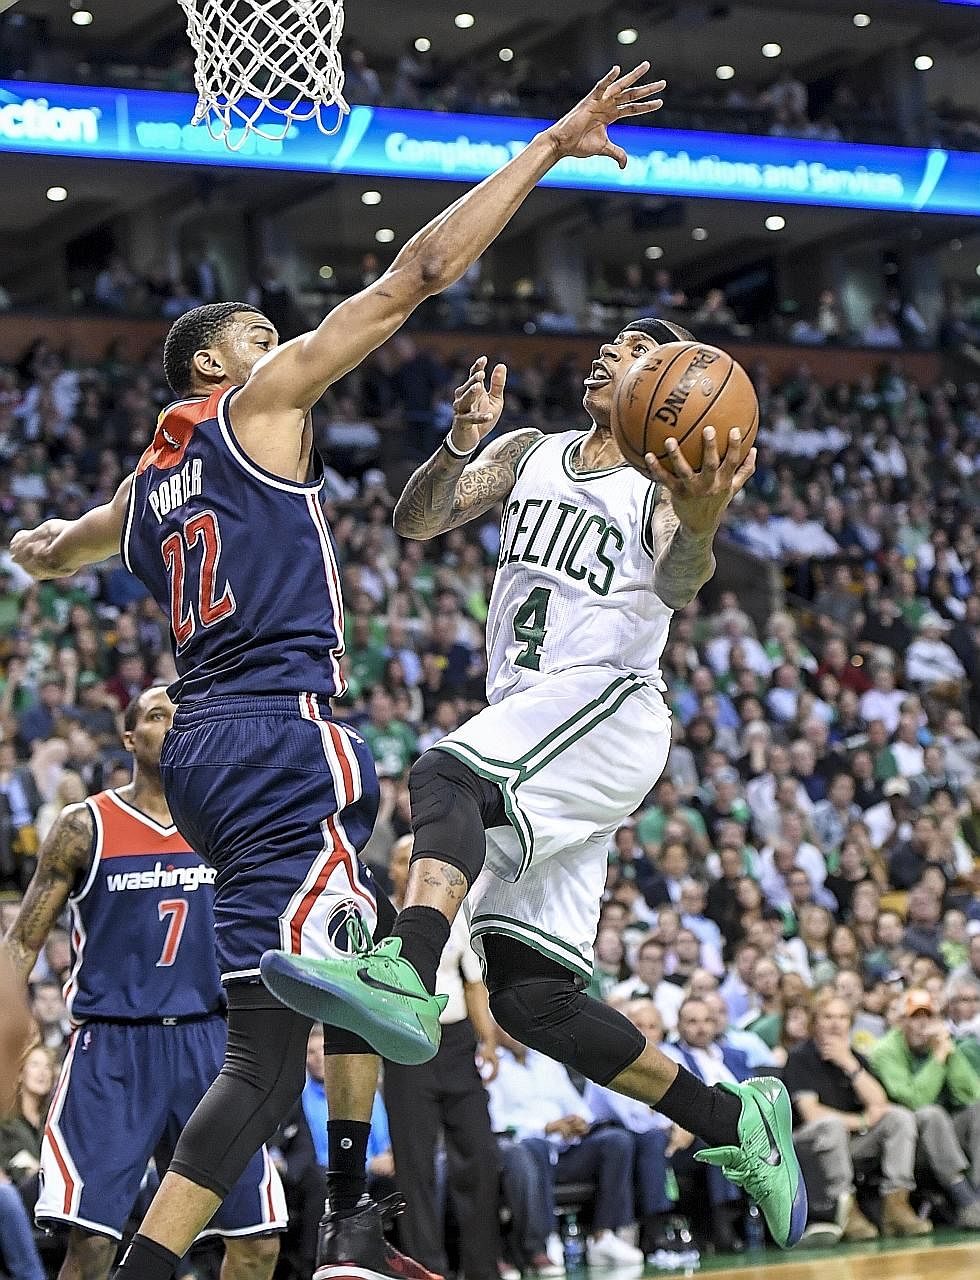 Celtics star Isaiah Thomas driving to the hoop against Wizards forward Otto Porter Jr during Game Two in Boston. Despite going through a six-hour dental procedure the day before, Thomas connected on 18 of 33 shots.